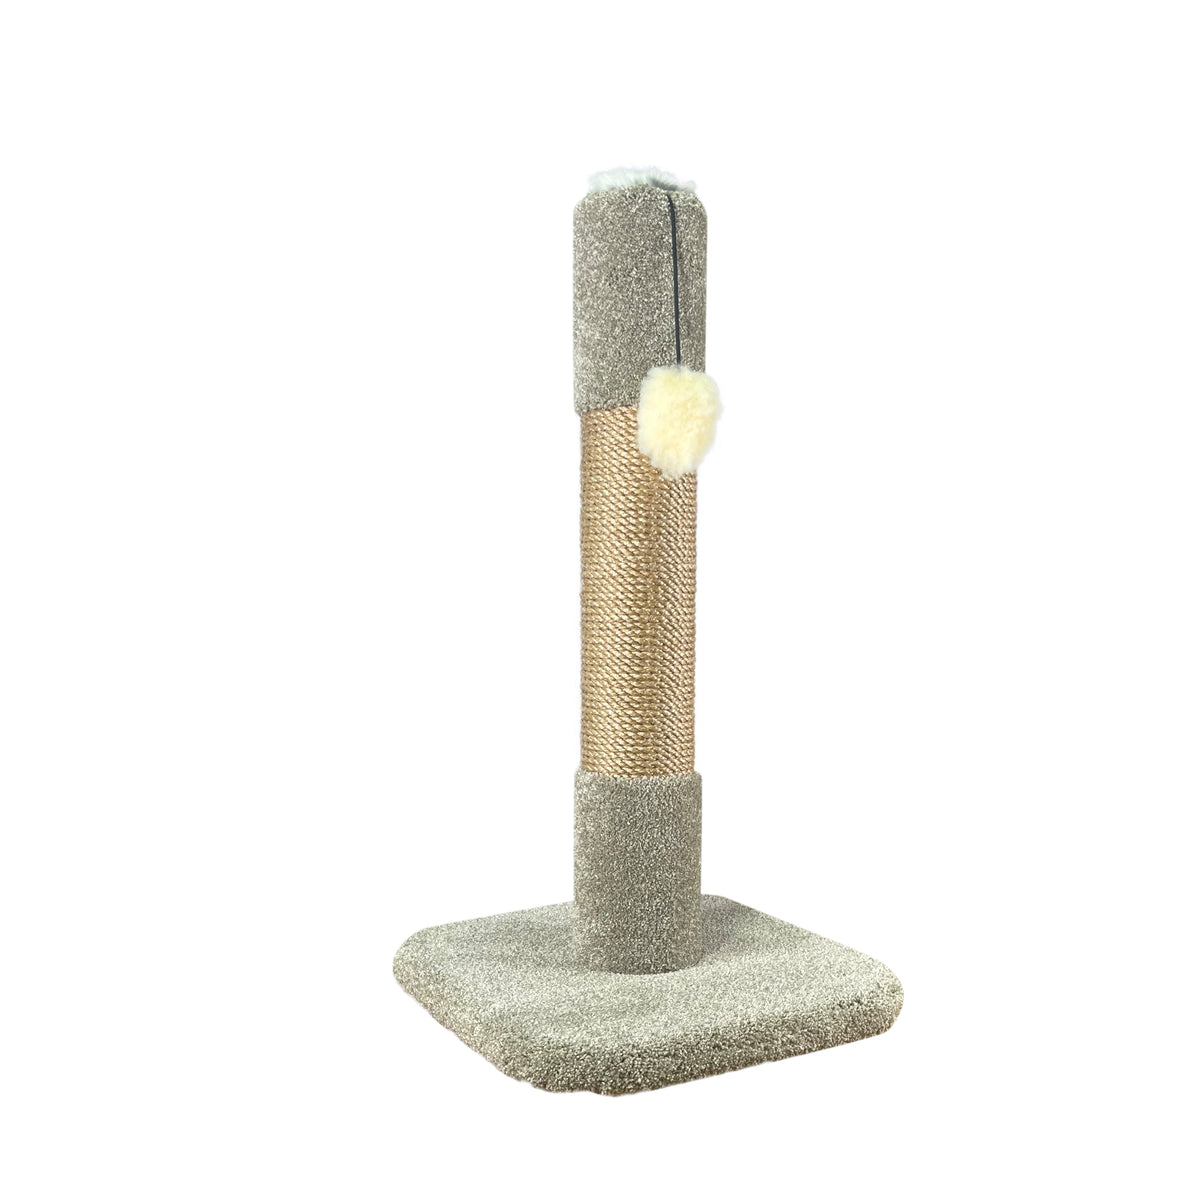 KatAttack Sierra Post Sisal with Square Base